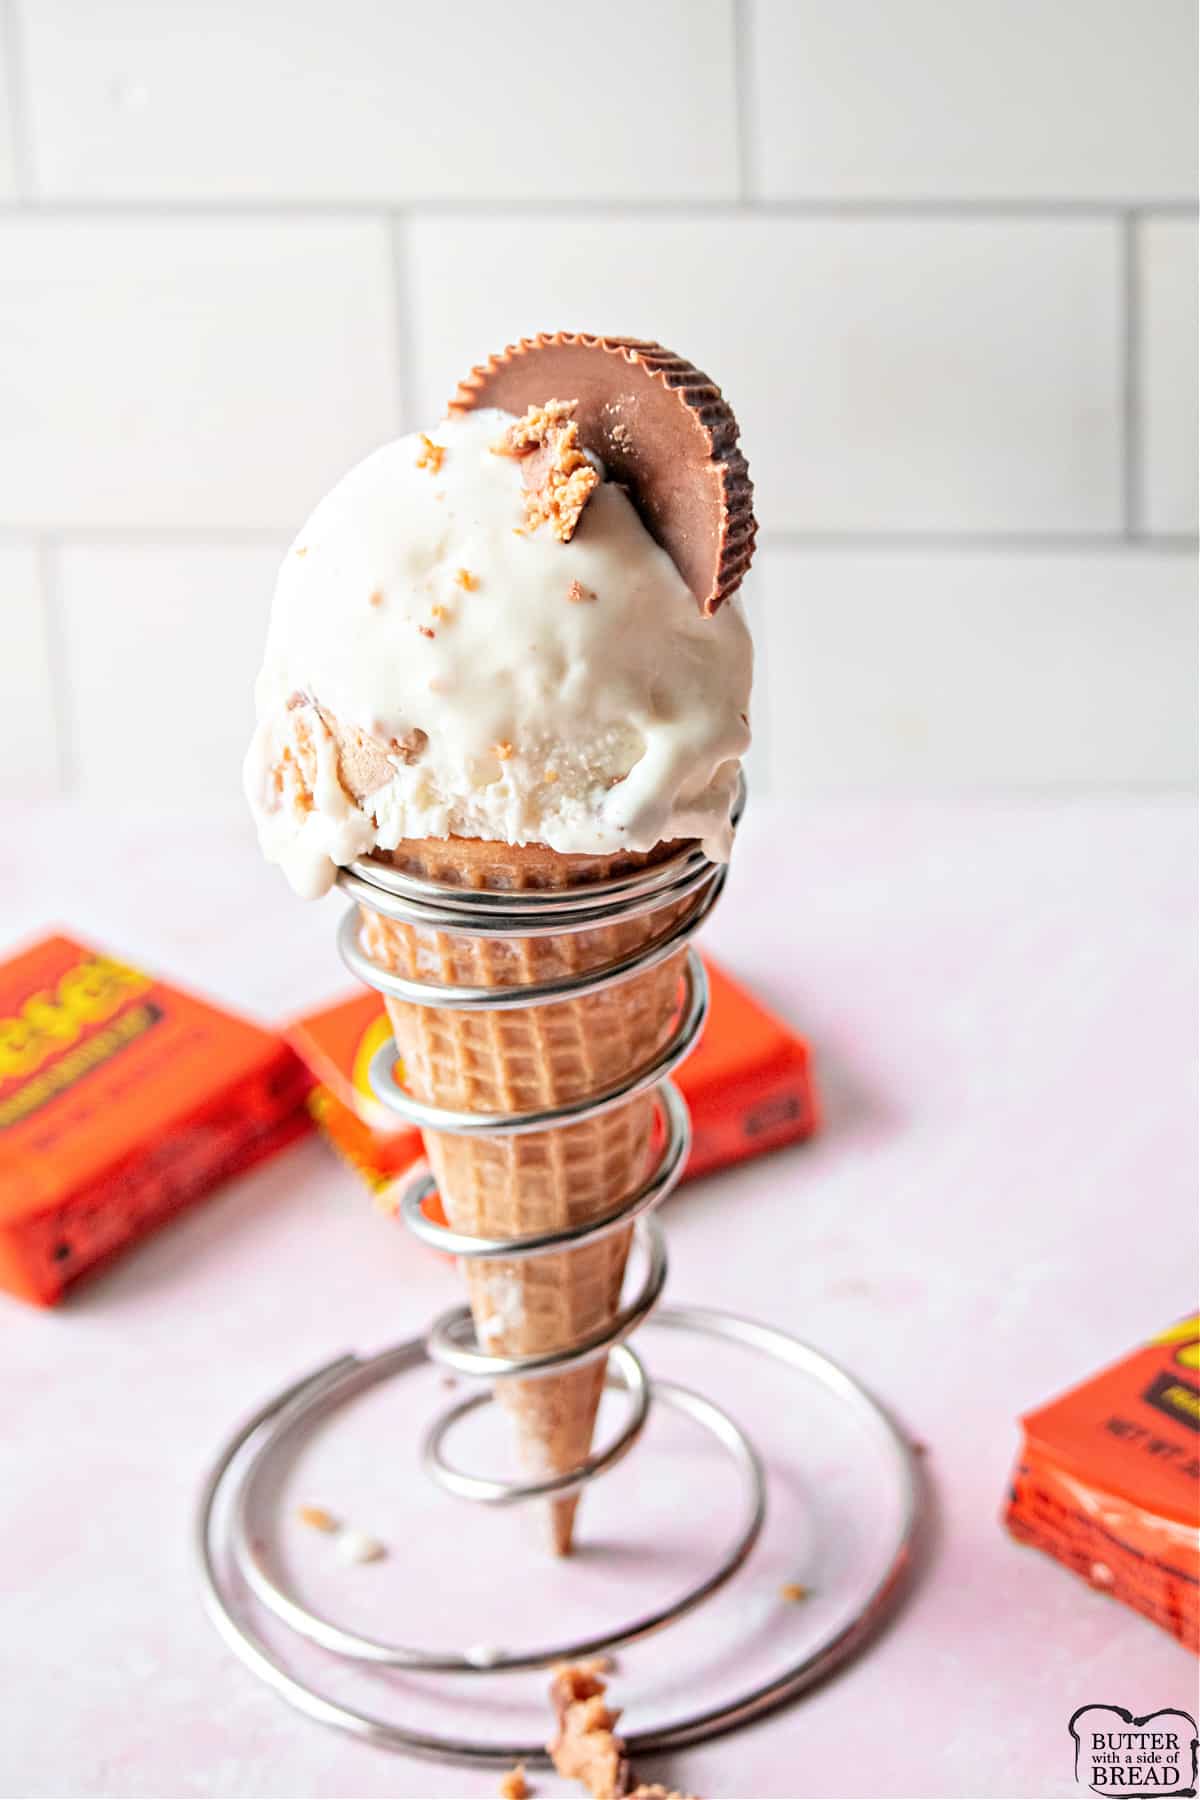 Reese's Peanut Butter Cup Ice Cream is made with only 6 ingredients, no ice cream maker required! Deliciously creamy vanilla ice cream recipe made with Reese's Peanut Butter Cups. 